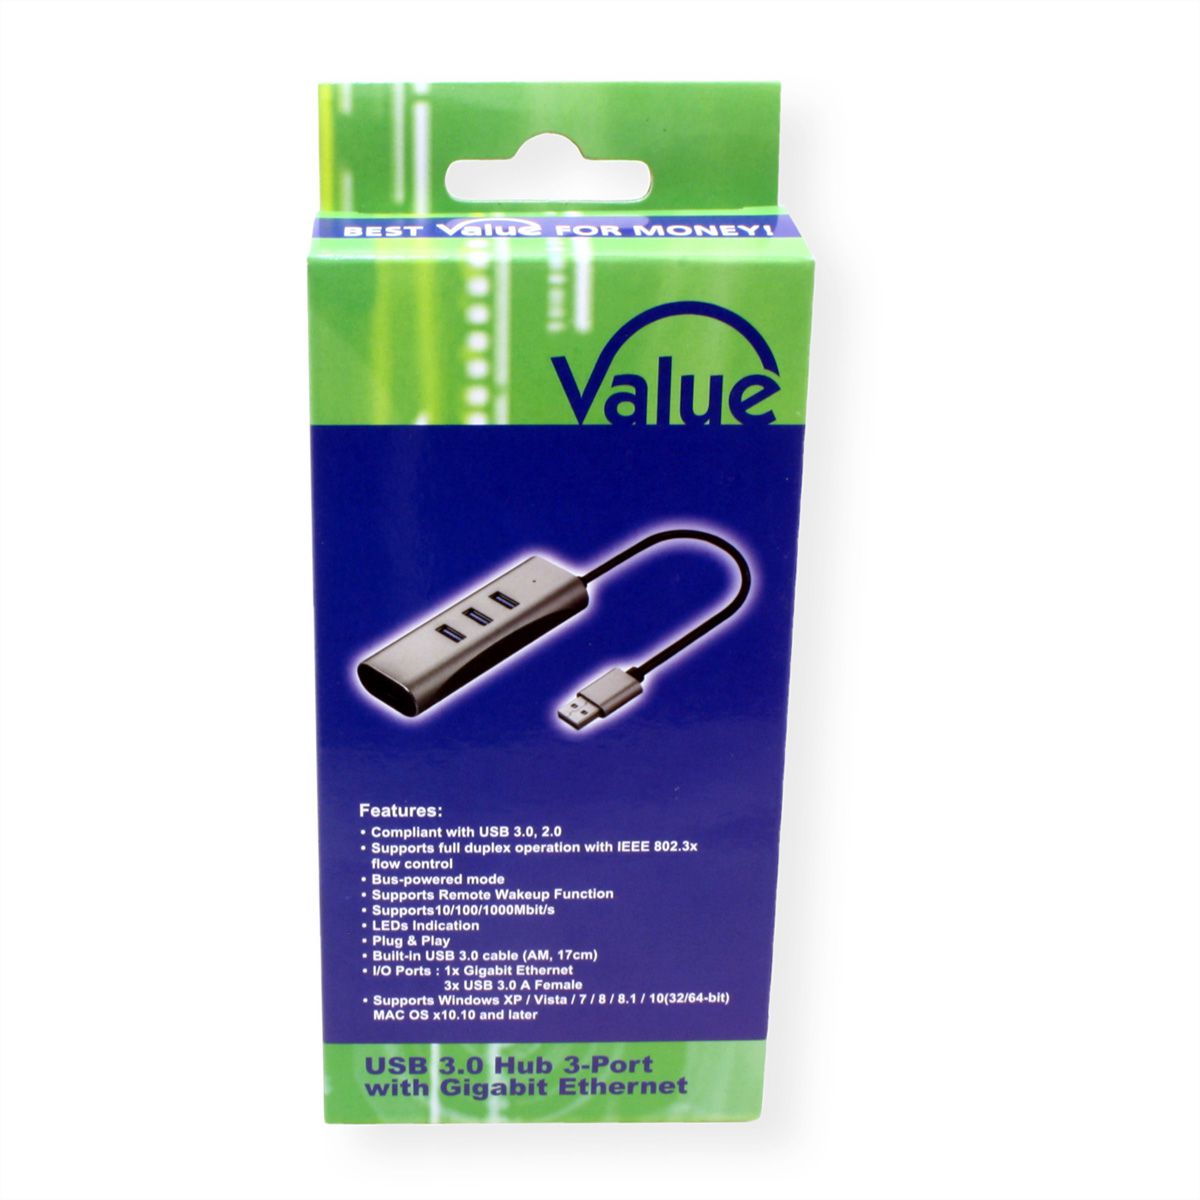 Usb Extenders For Usb 1 1 2 0 And 3 0